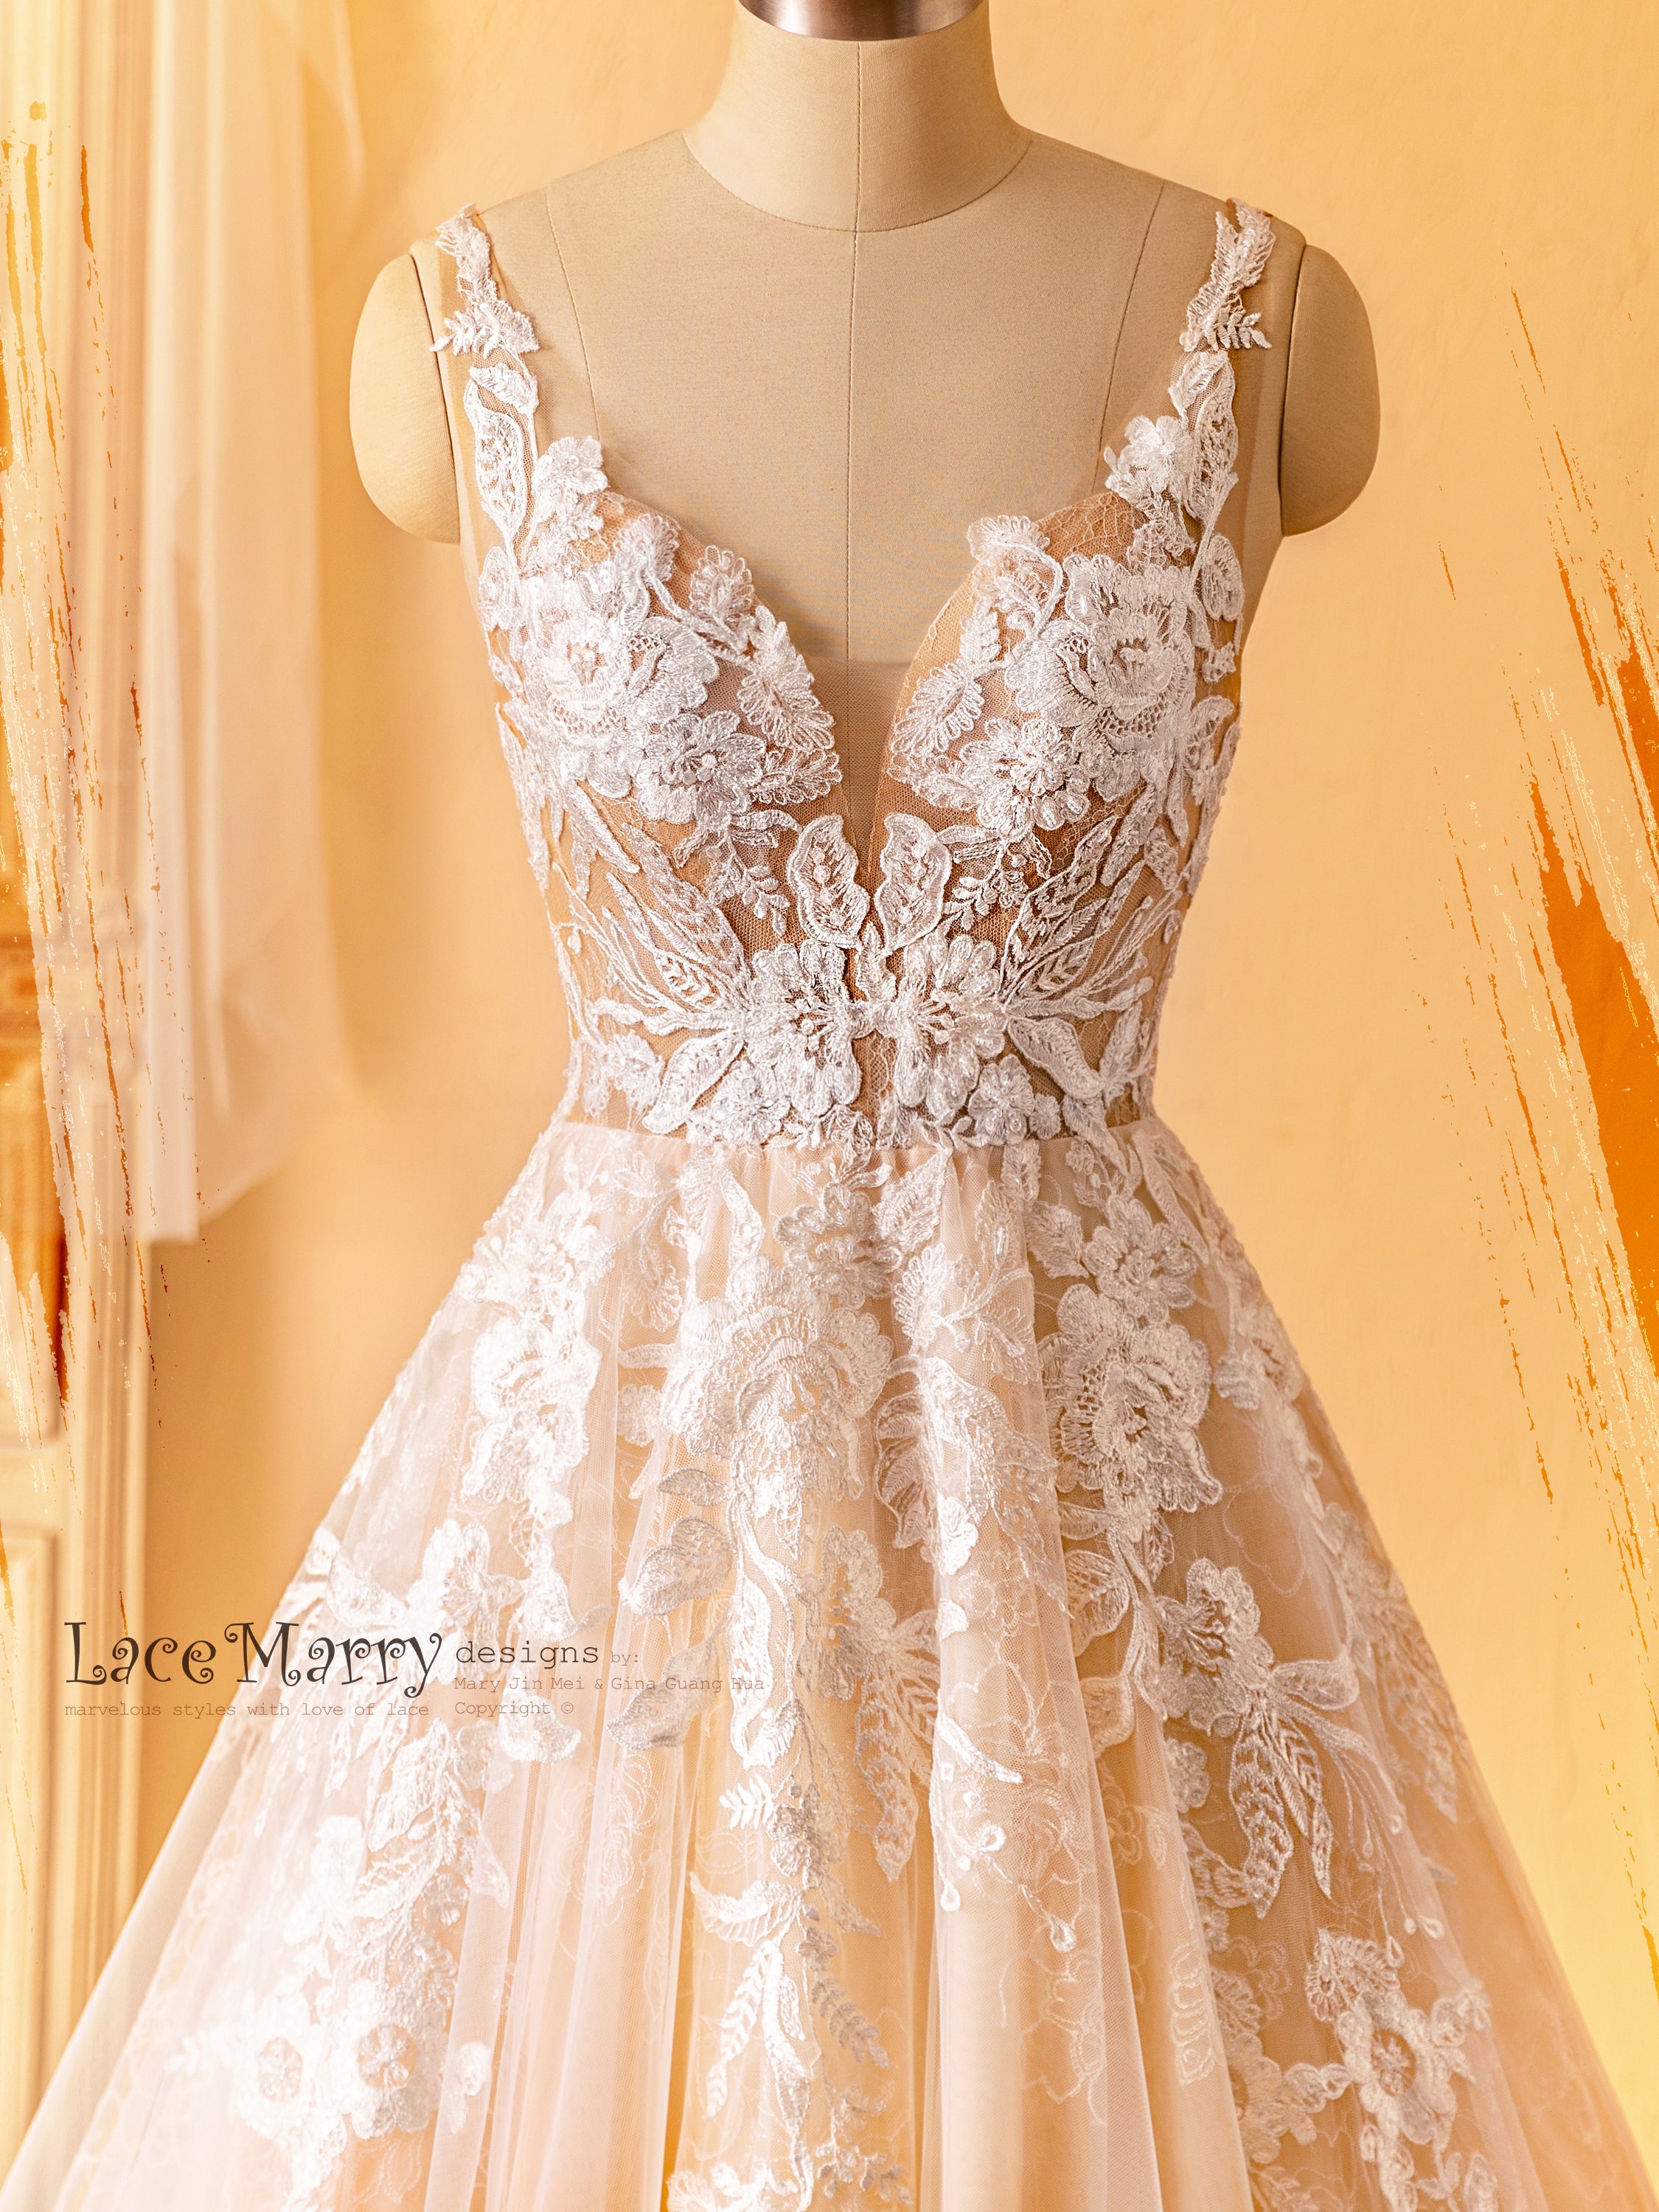 CELINE / Enchanting Lace Wedding Dress with Flower Embroidery